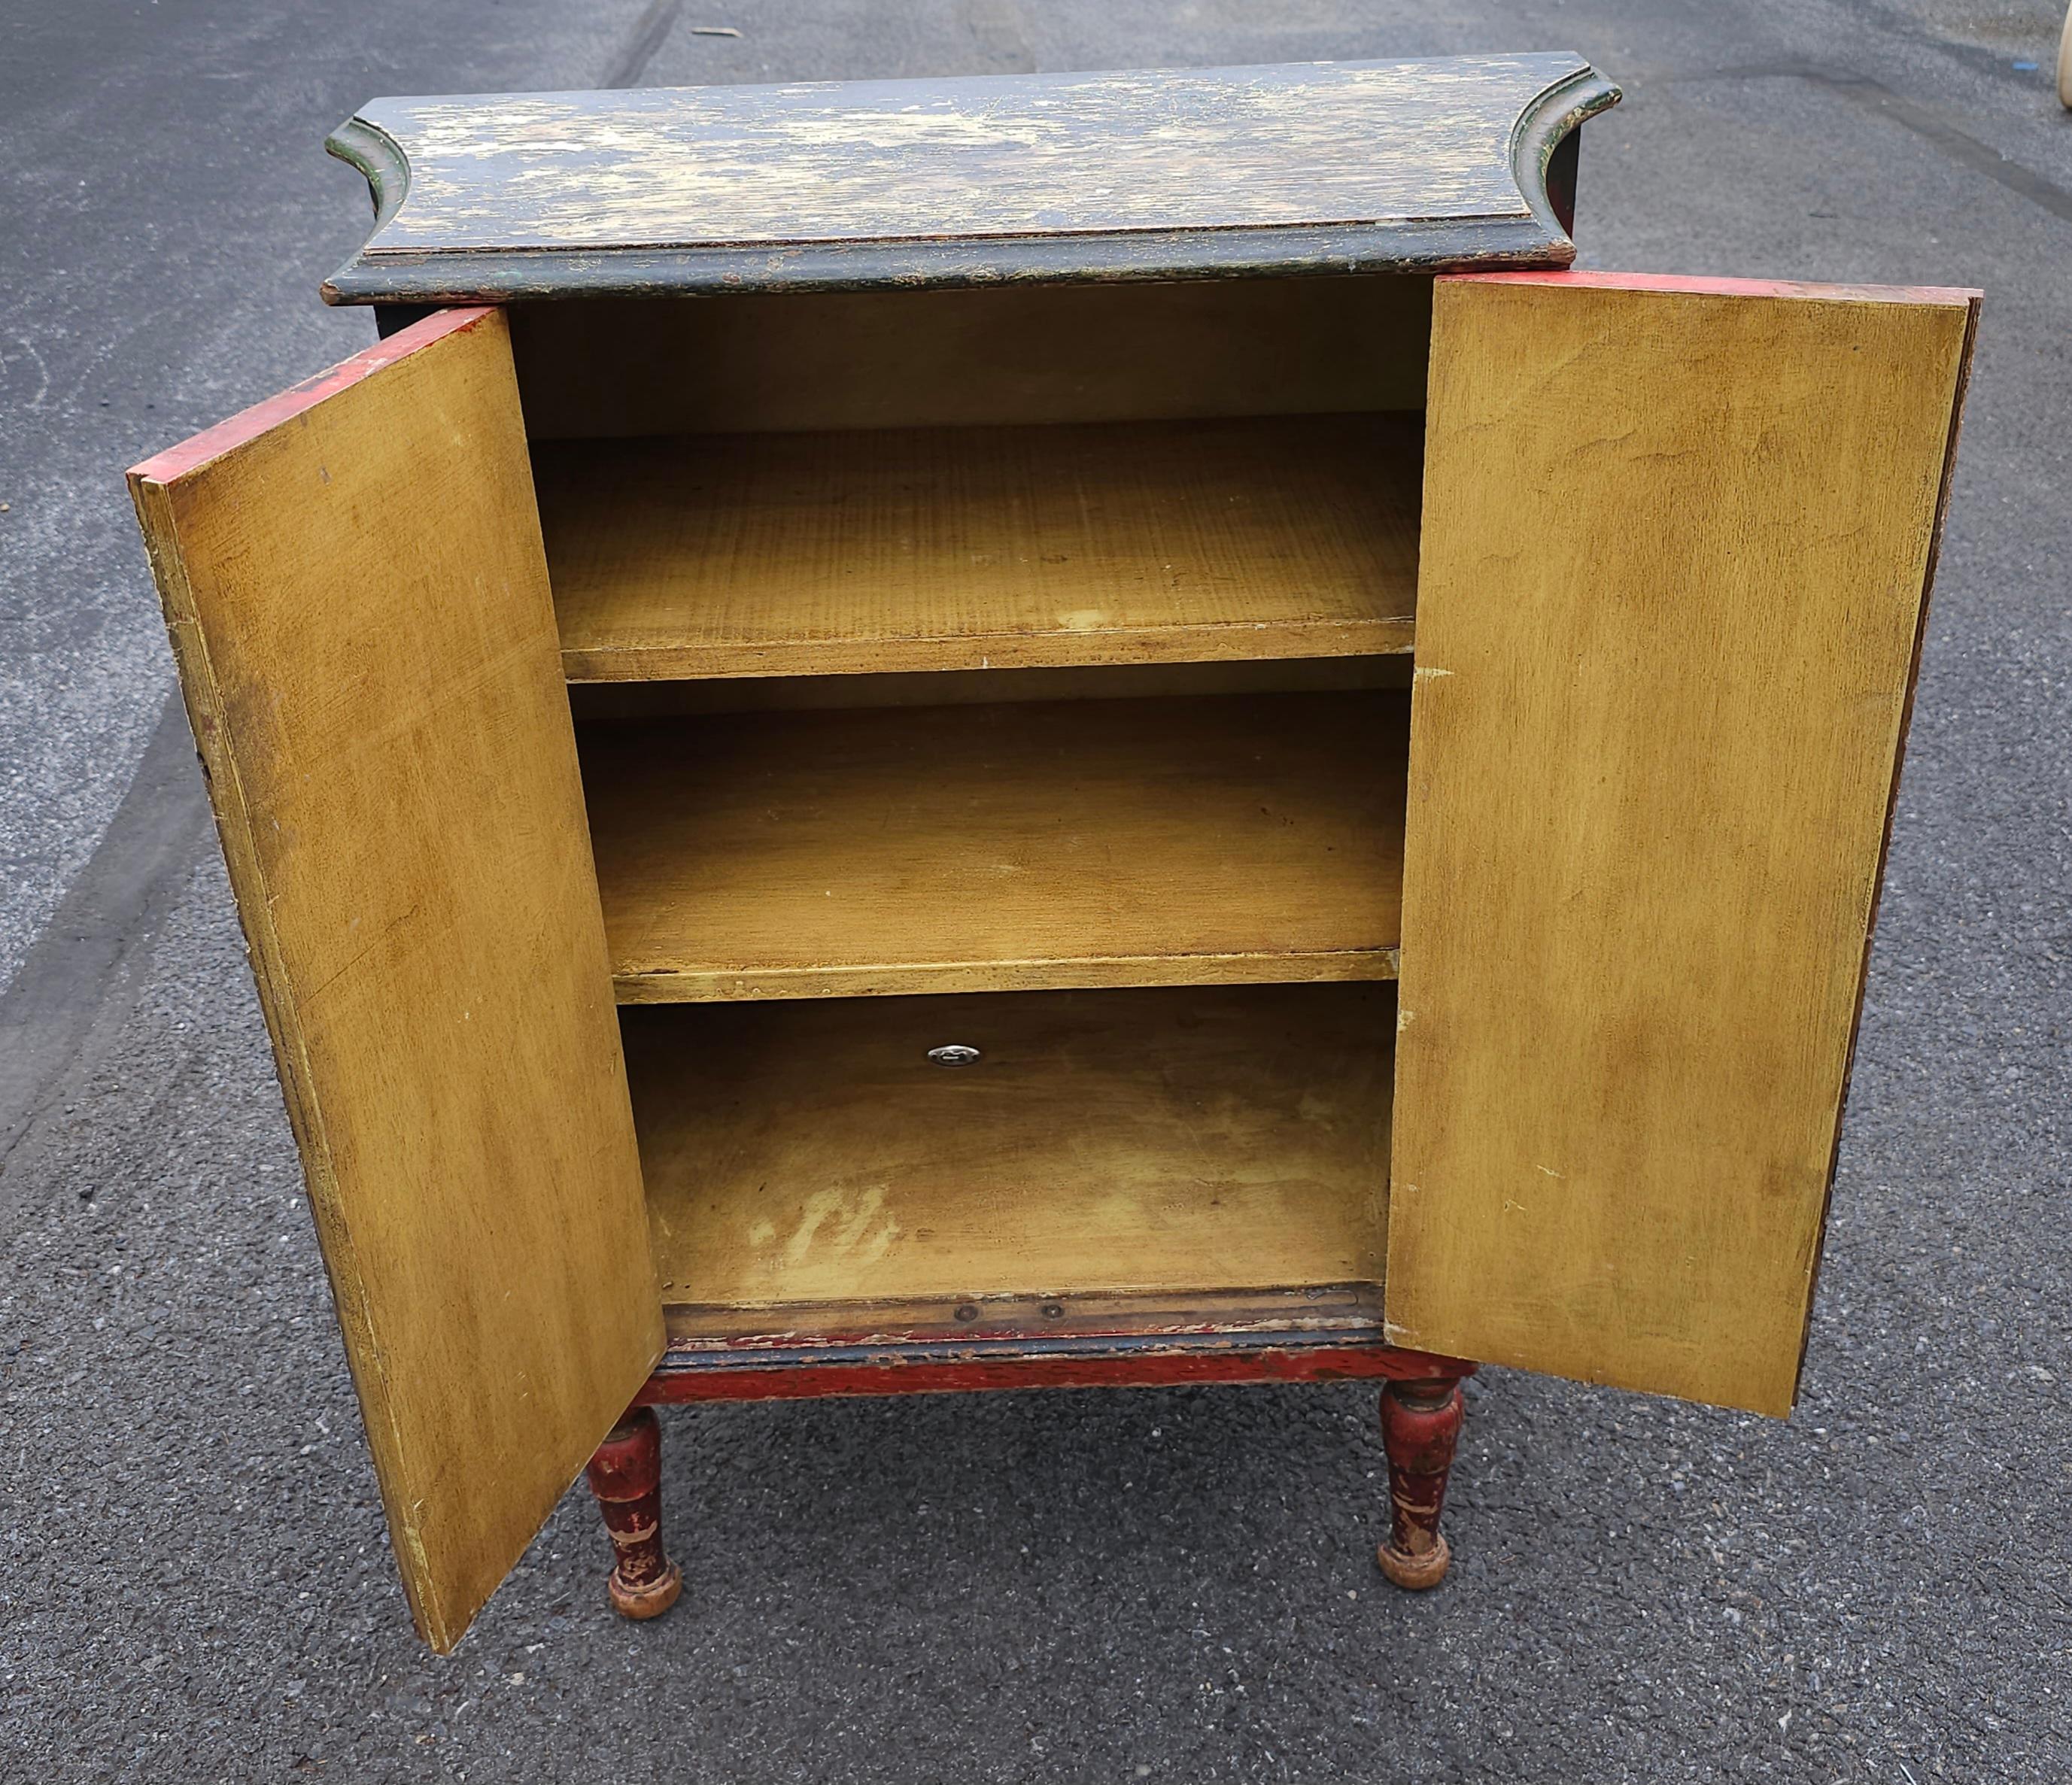 A Mid-Century Antiqued Painted and Decorated Two-Door Side Cabinet. Comes with two adjustable height shelves.
Measures 27.75